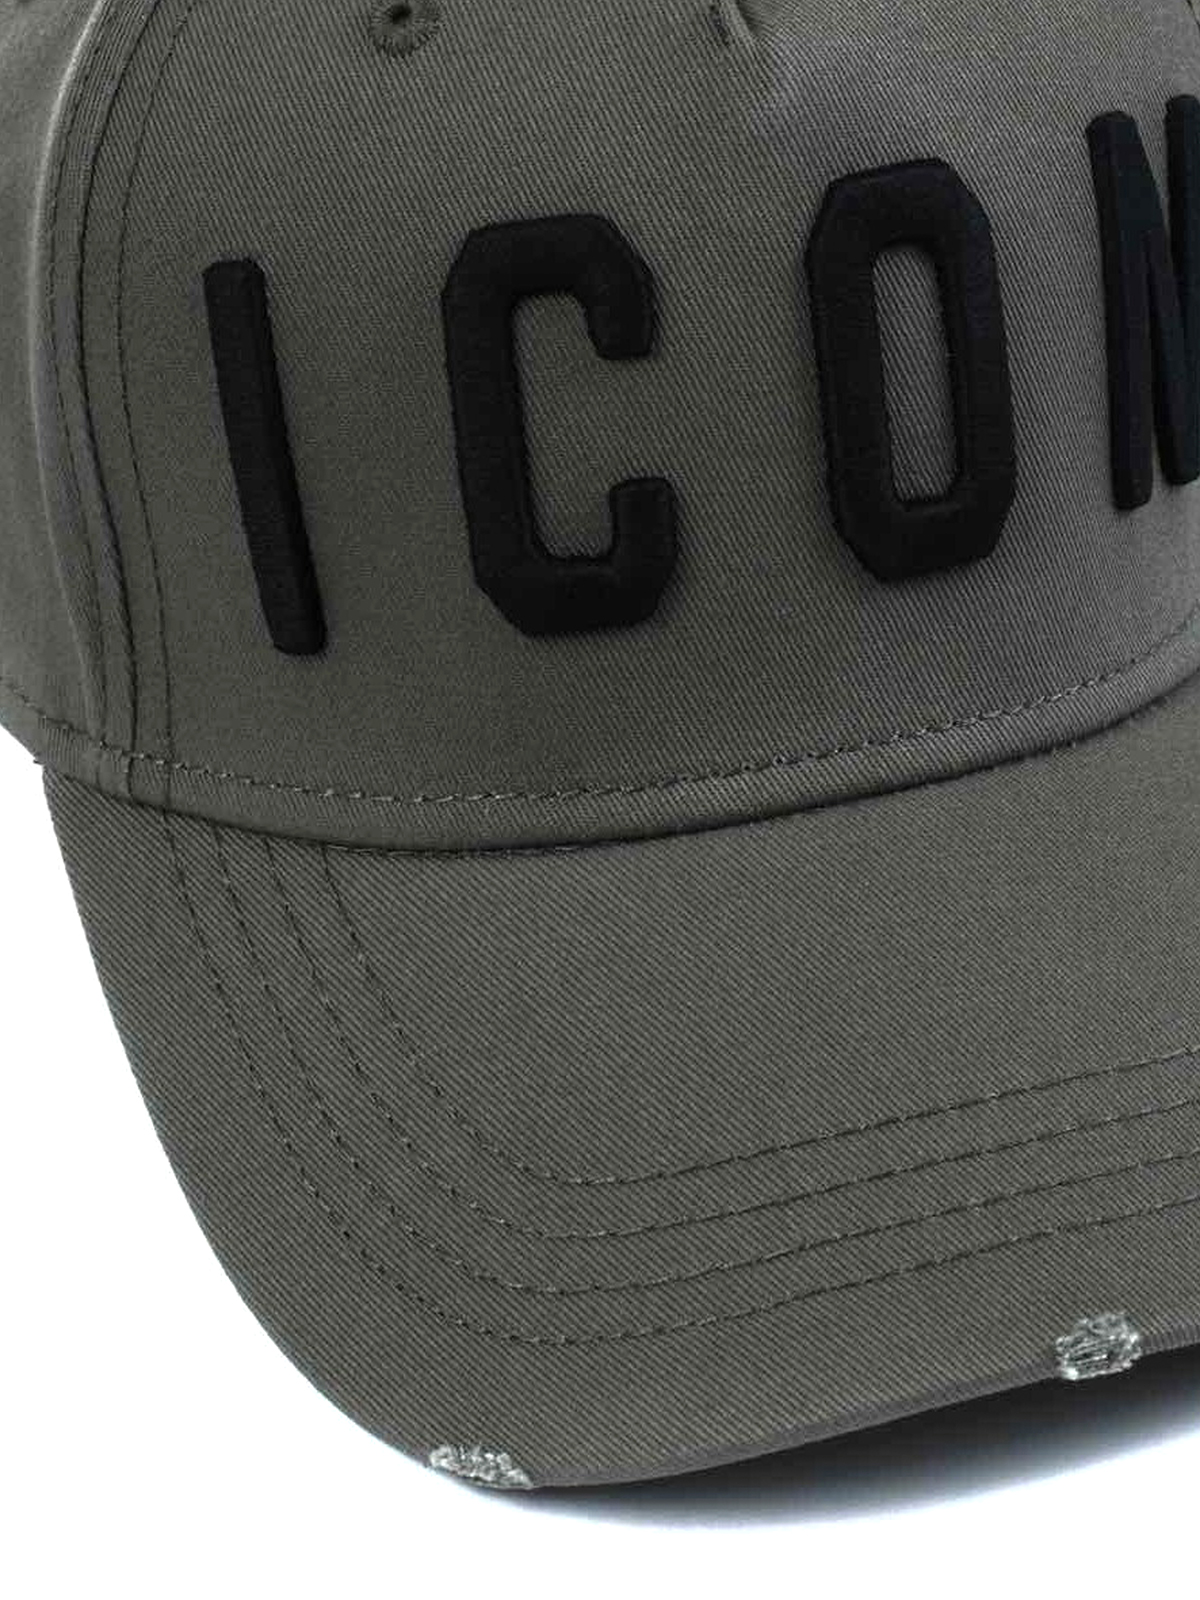 Minst snap Drijvende kracht Hats & caps Dsquared2 - Icon army green baseball cap - BCM400105C00001M1115